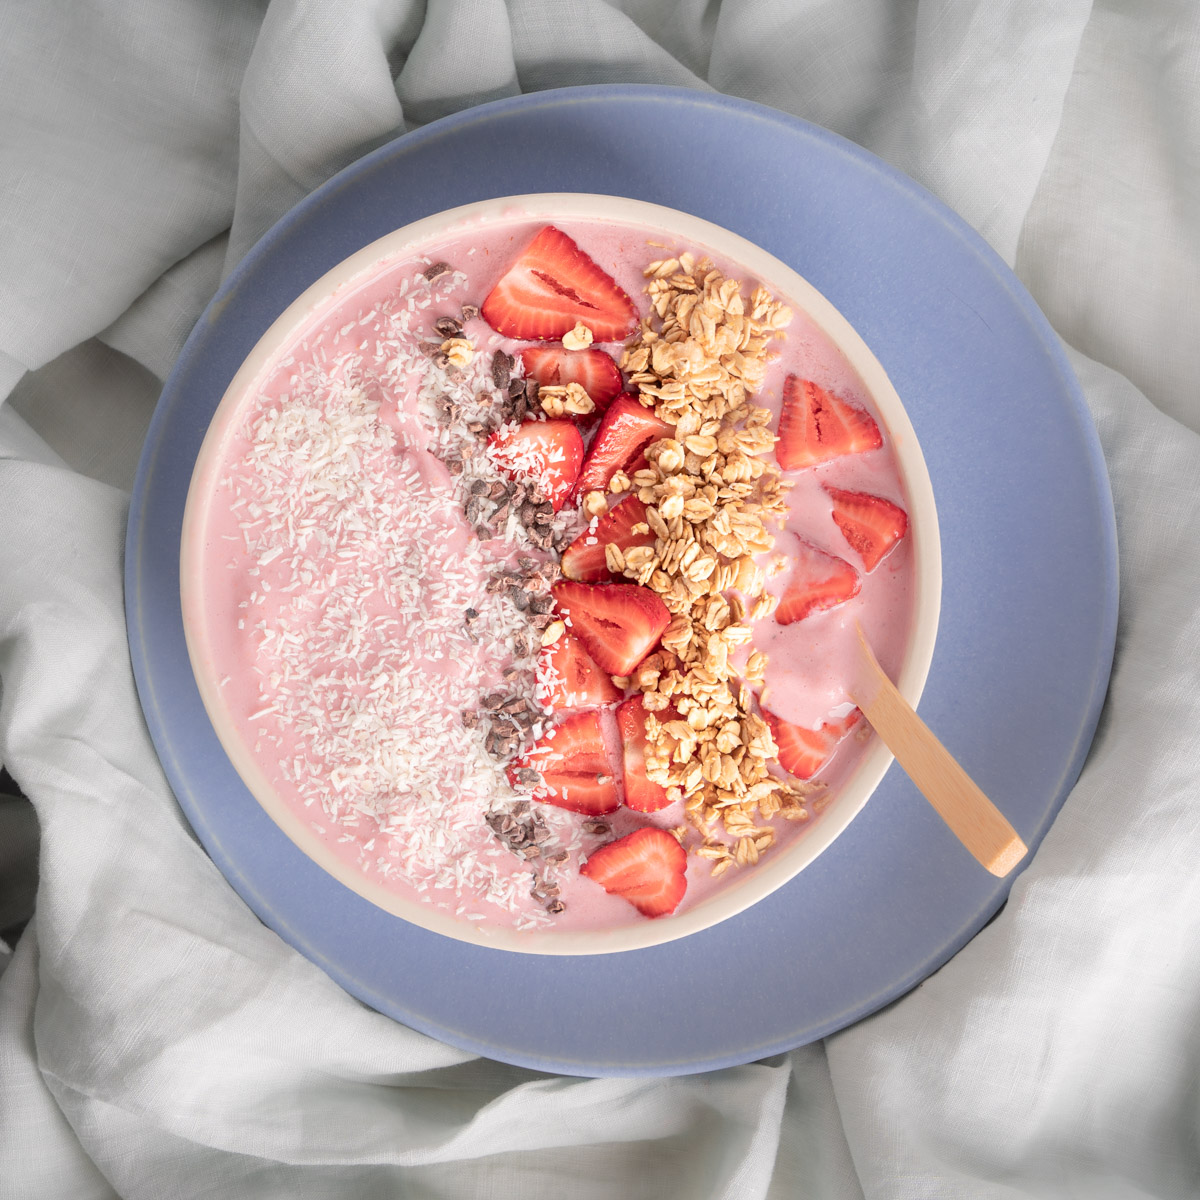 Strawberry Smoothie Bowl. Pink colored smoothie base with coconut flake, cocoa nib, sliced strawberry, and granola toppings. Placed on a blue plate over a sage linen table cloth.